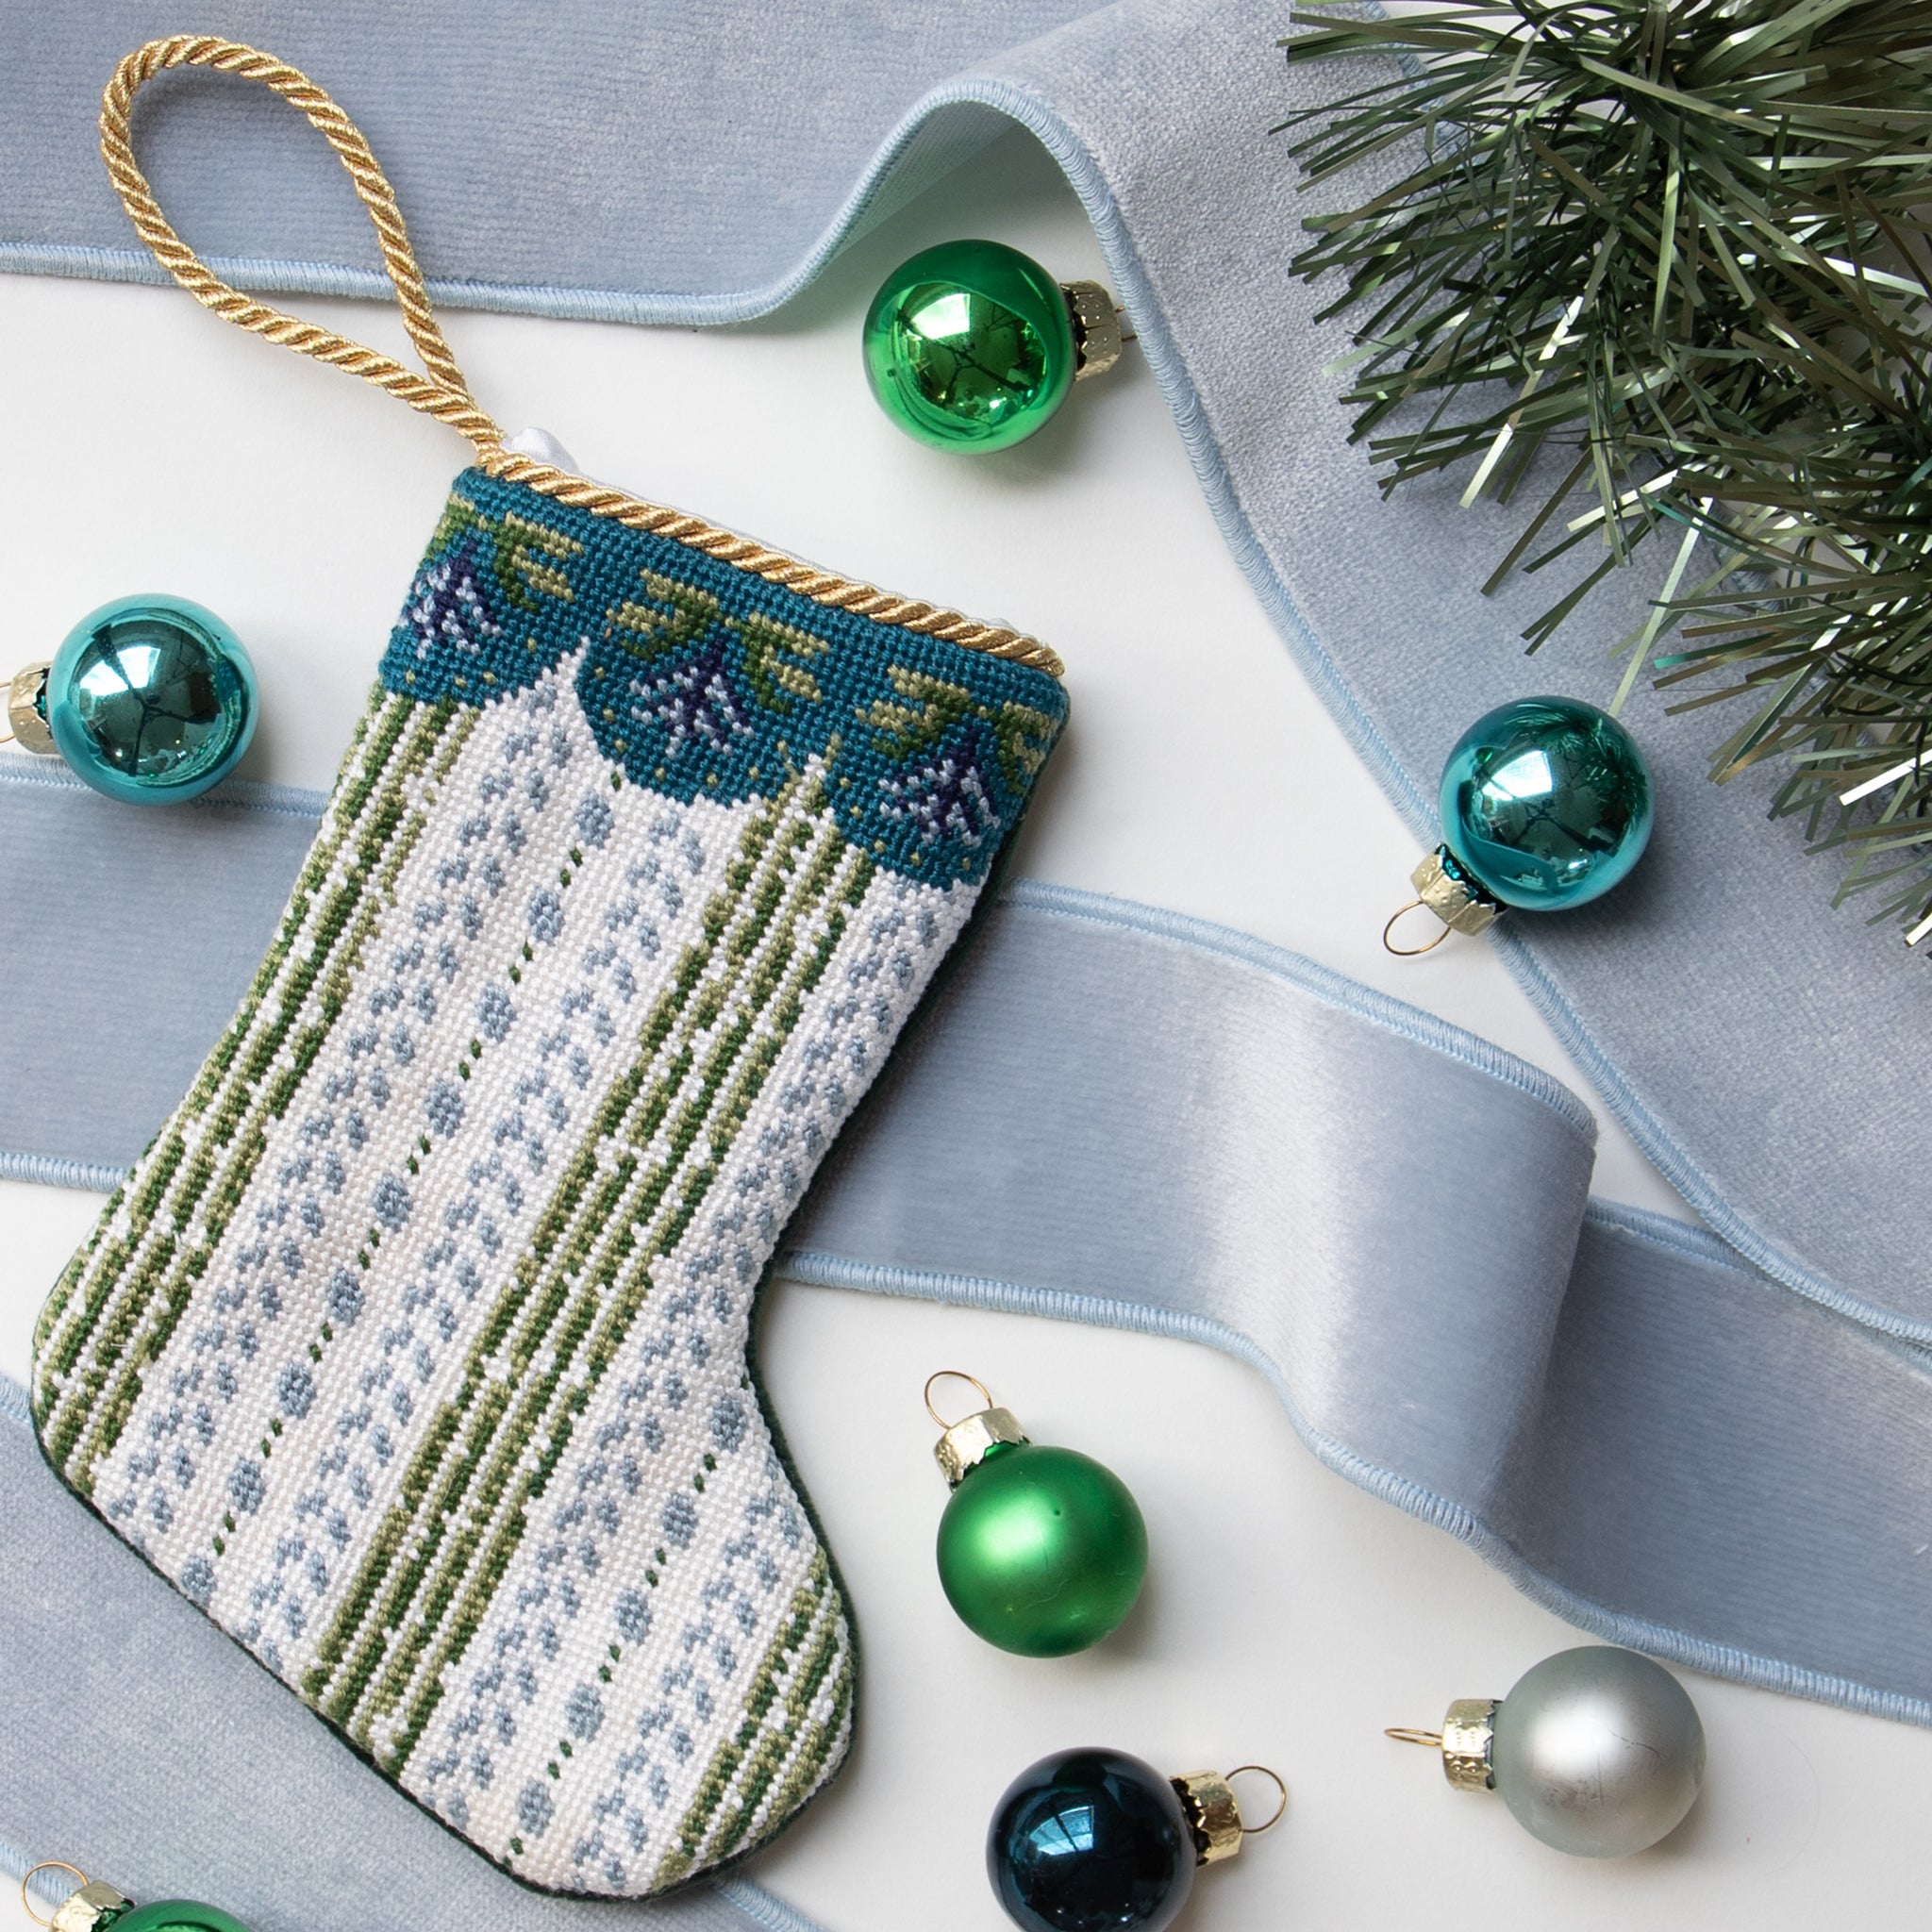 Mini blue and green striped stocking ornament styled with blue velvet fabric trim and mini ball ornaments